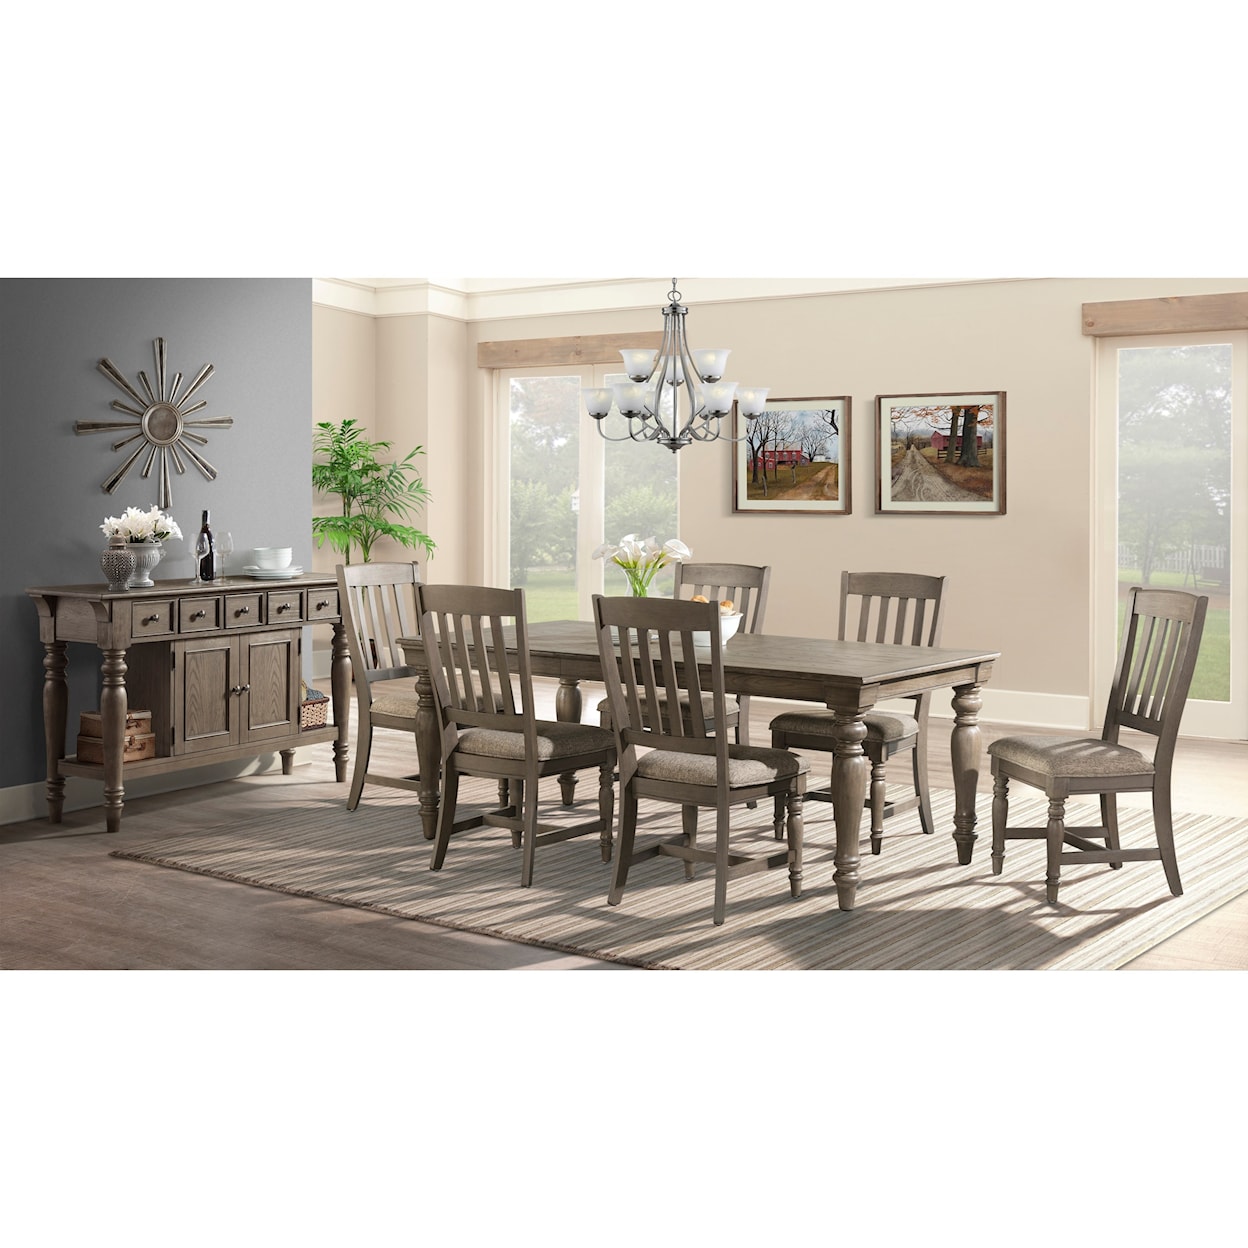 Intercon 11878 Dining Room Group